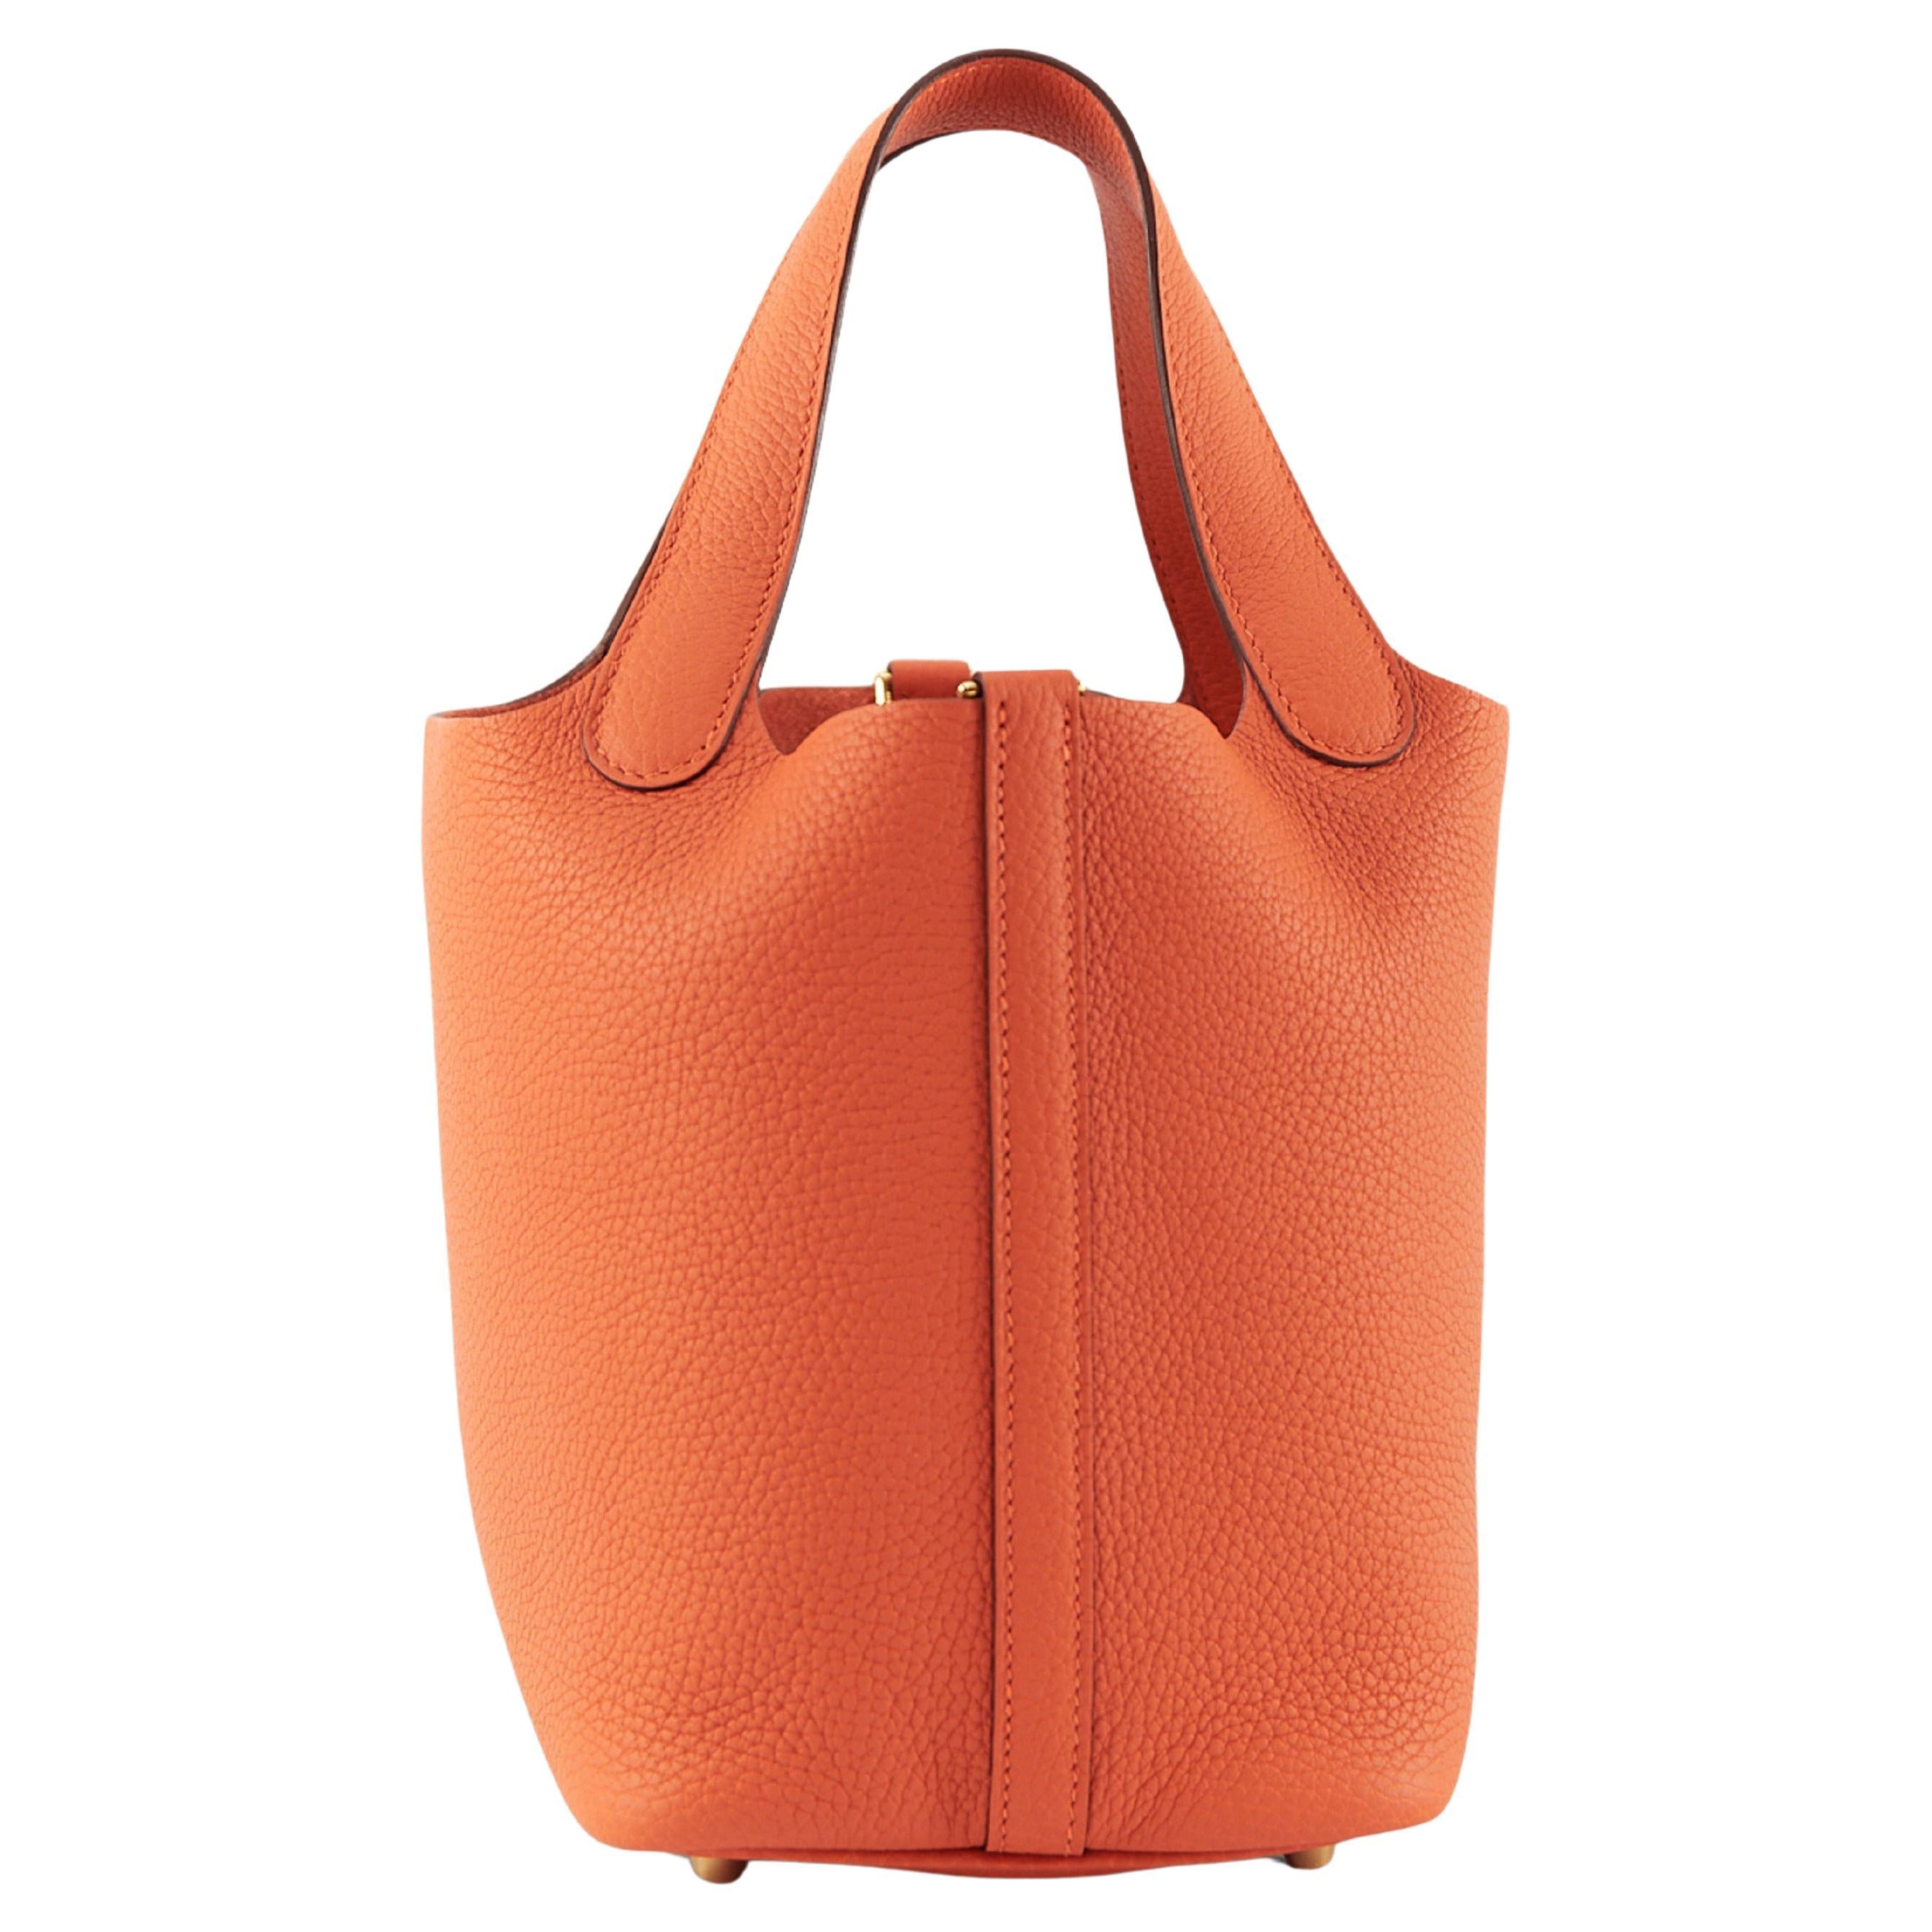 HERMÈS PICOTIN 18CM ORANGE Clemence Leather with Gold Hardware